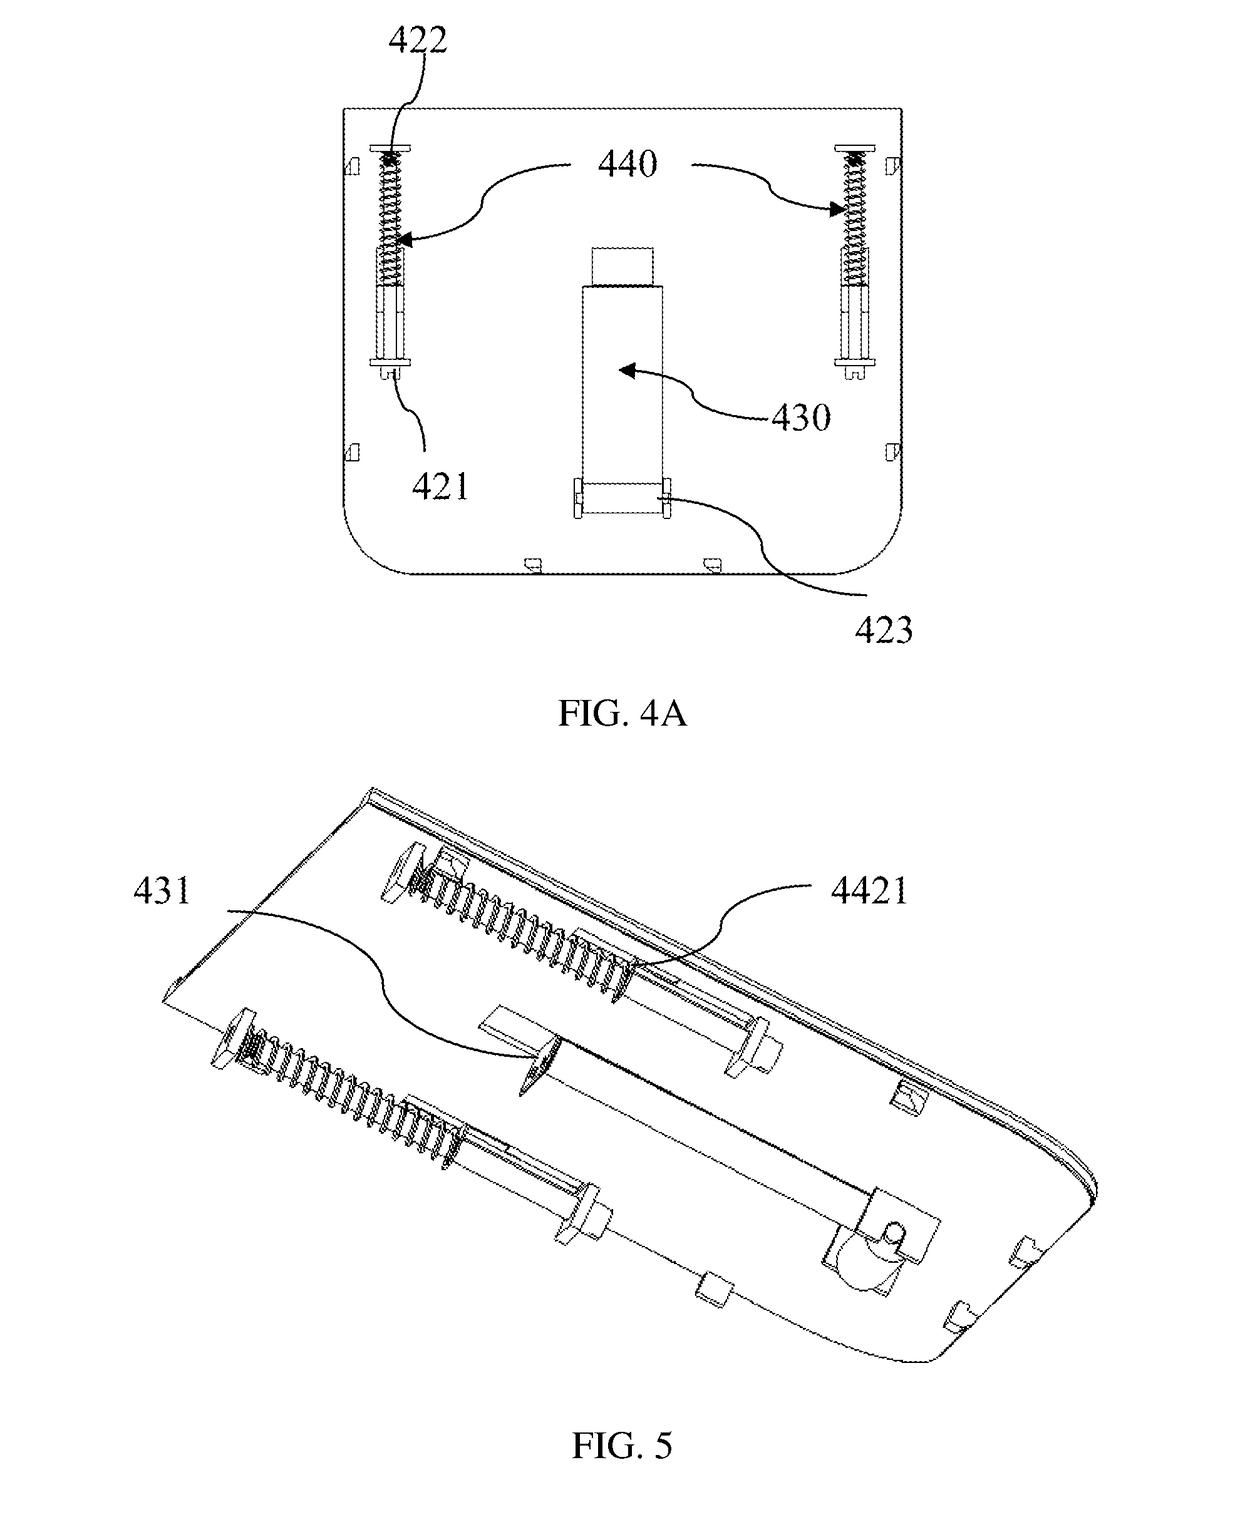 Foldable Display Device